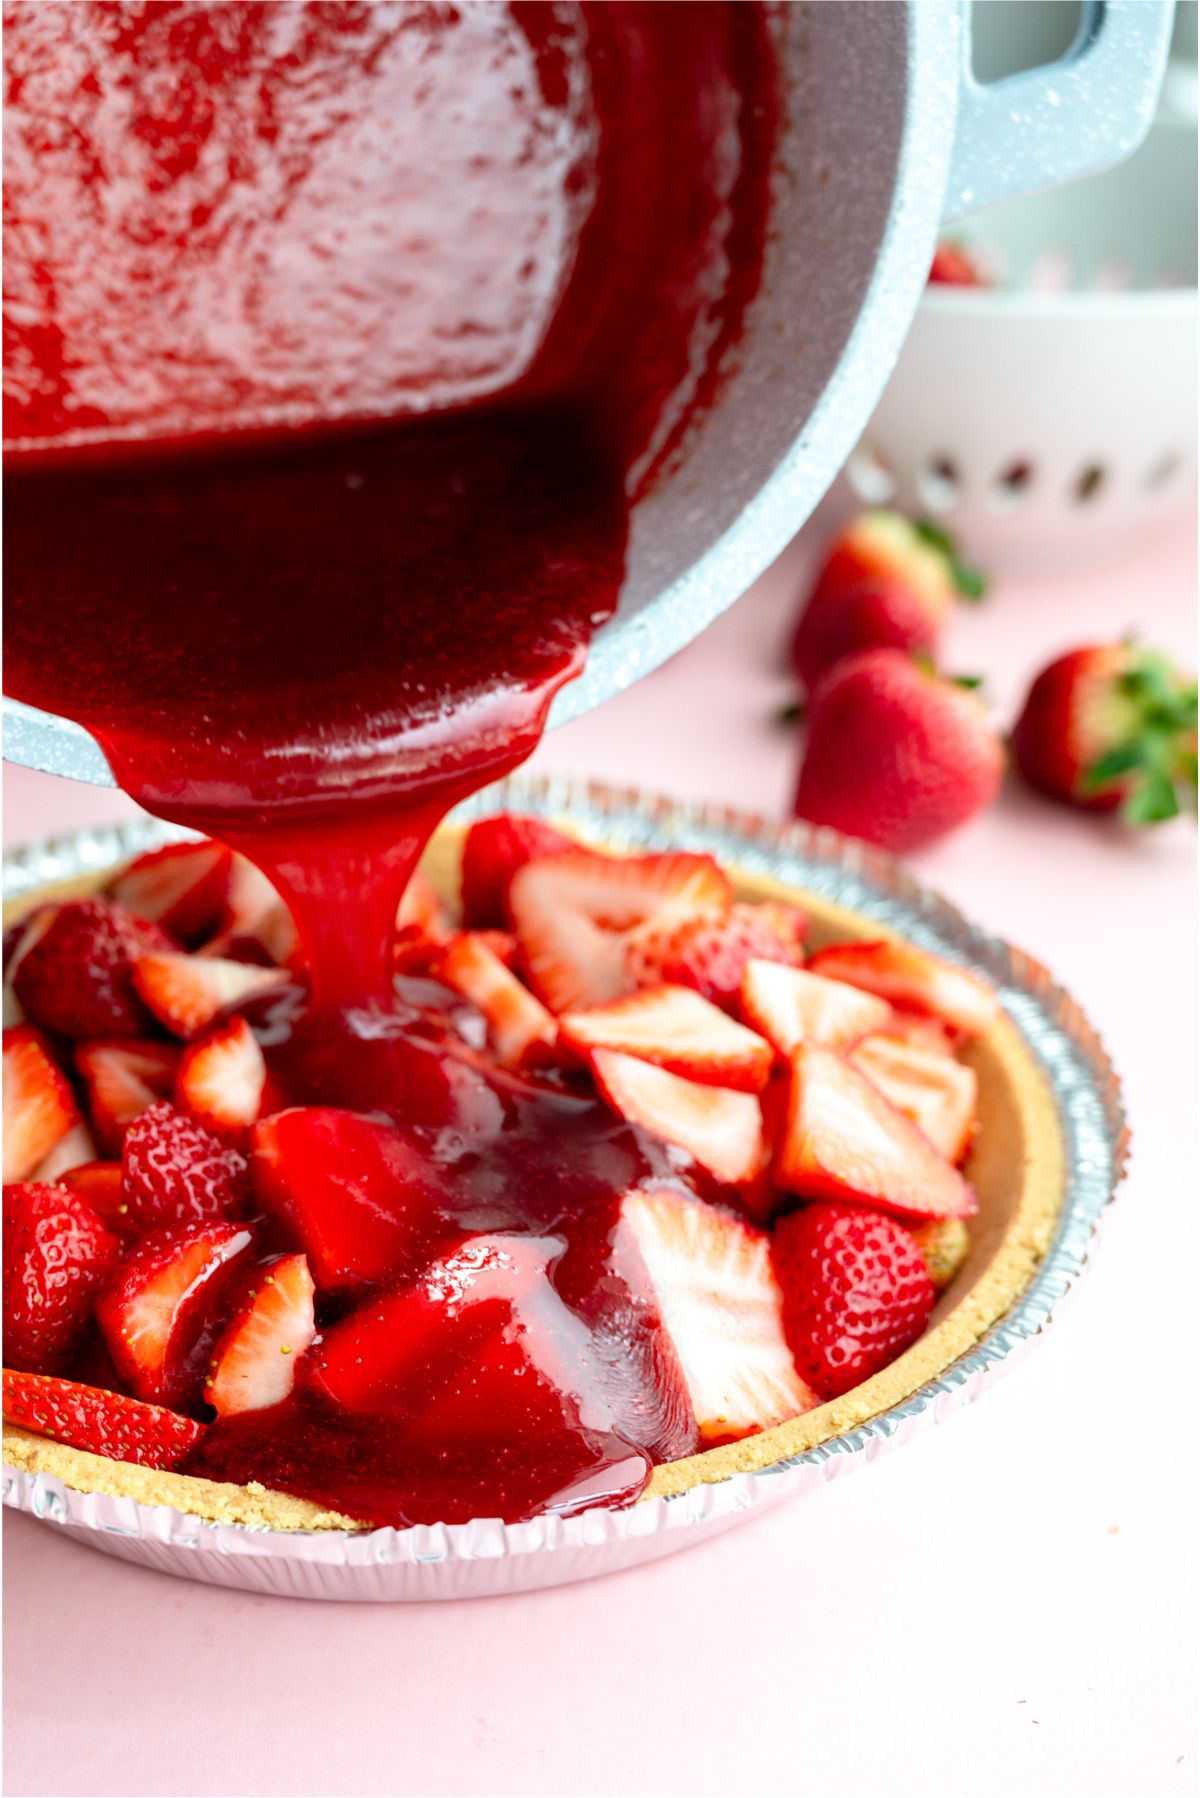 Pouring strawberry sauce on top of strawberries in pie crust